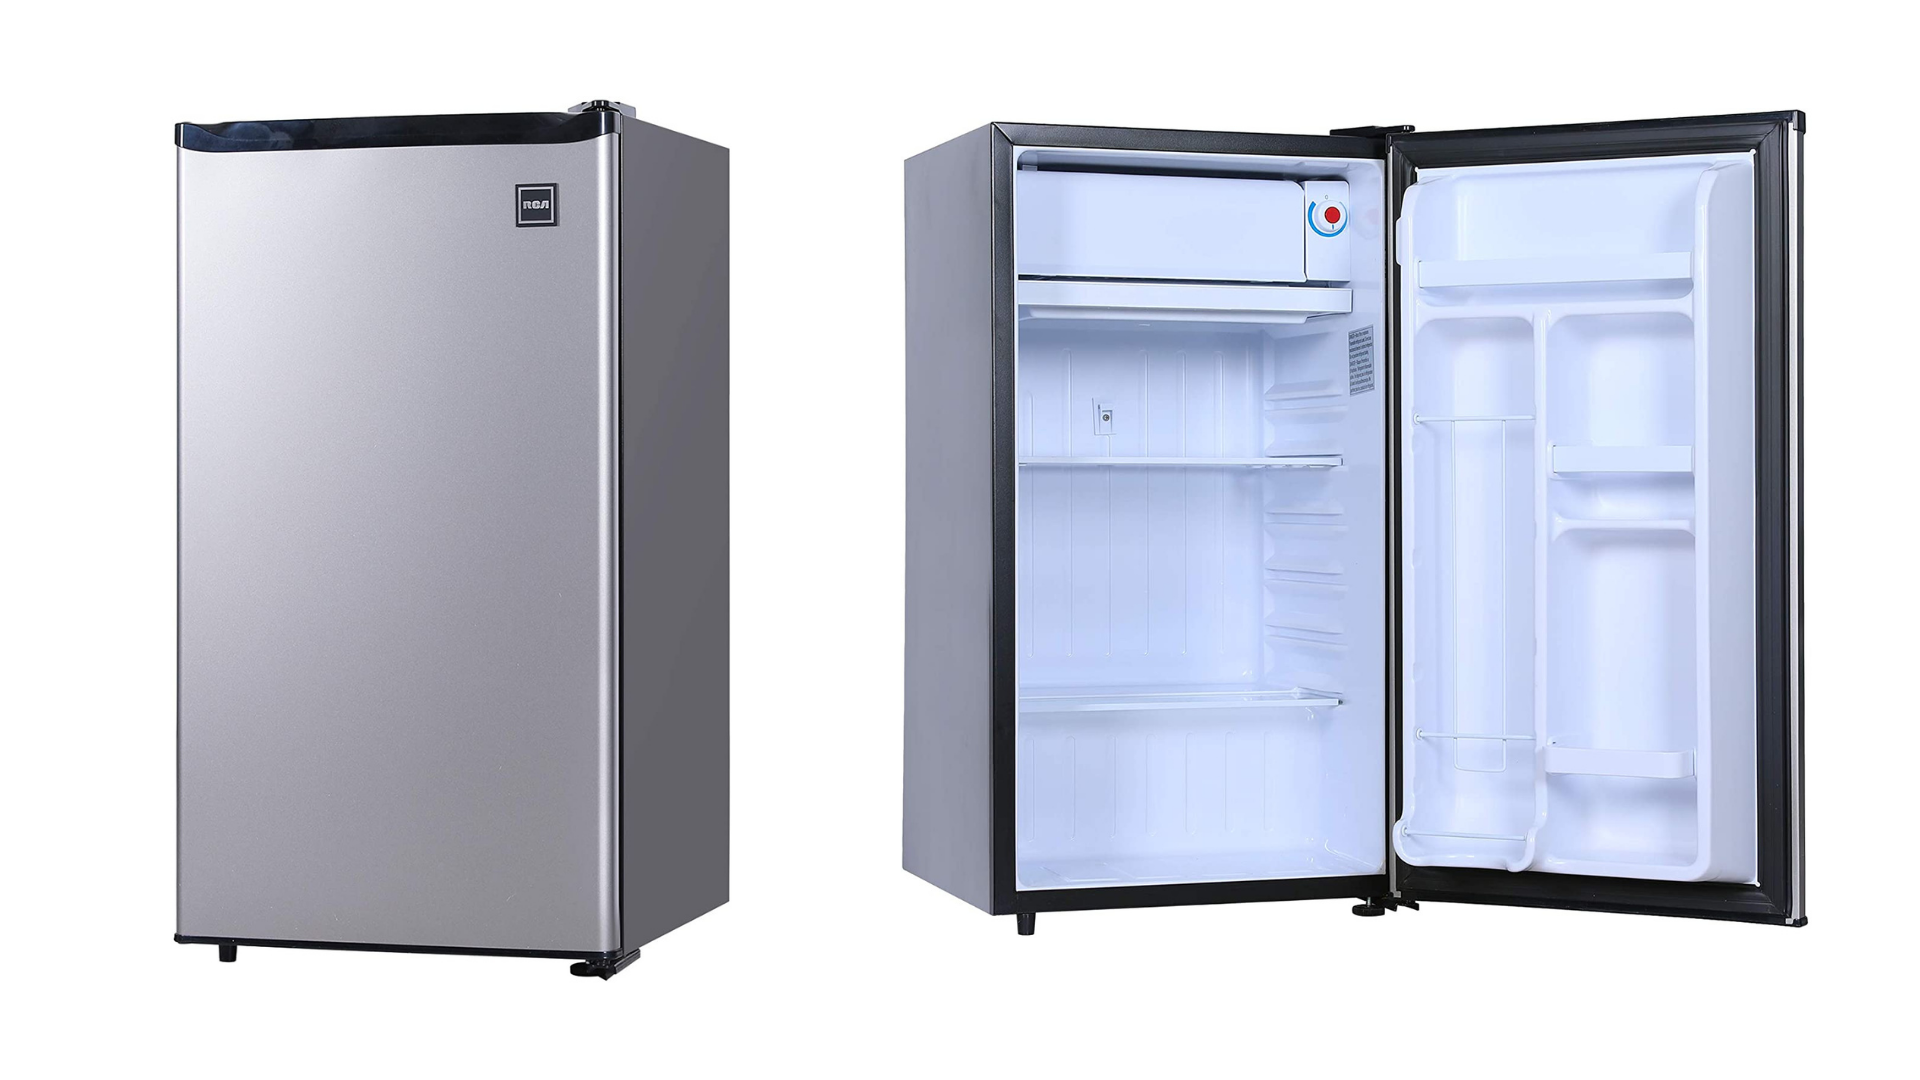 It also has a small freezer compartment but still has enough space to hold the ice tray and pizza box.